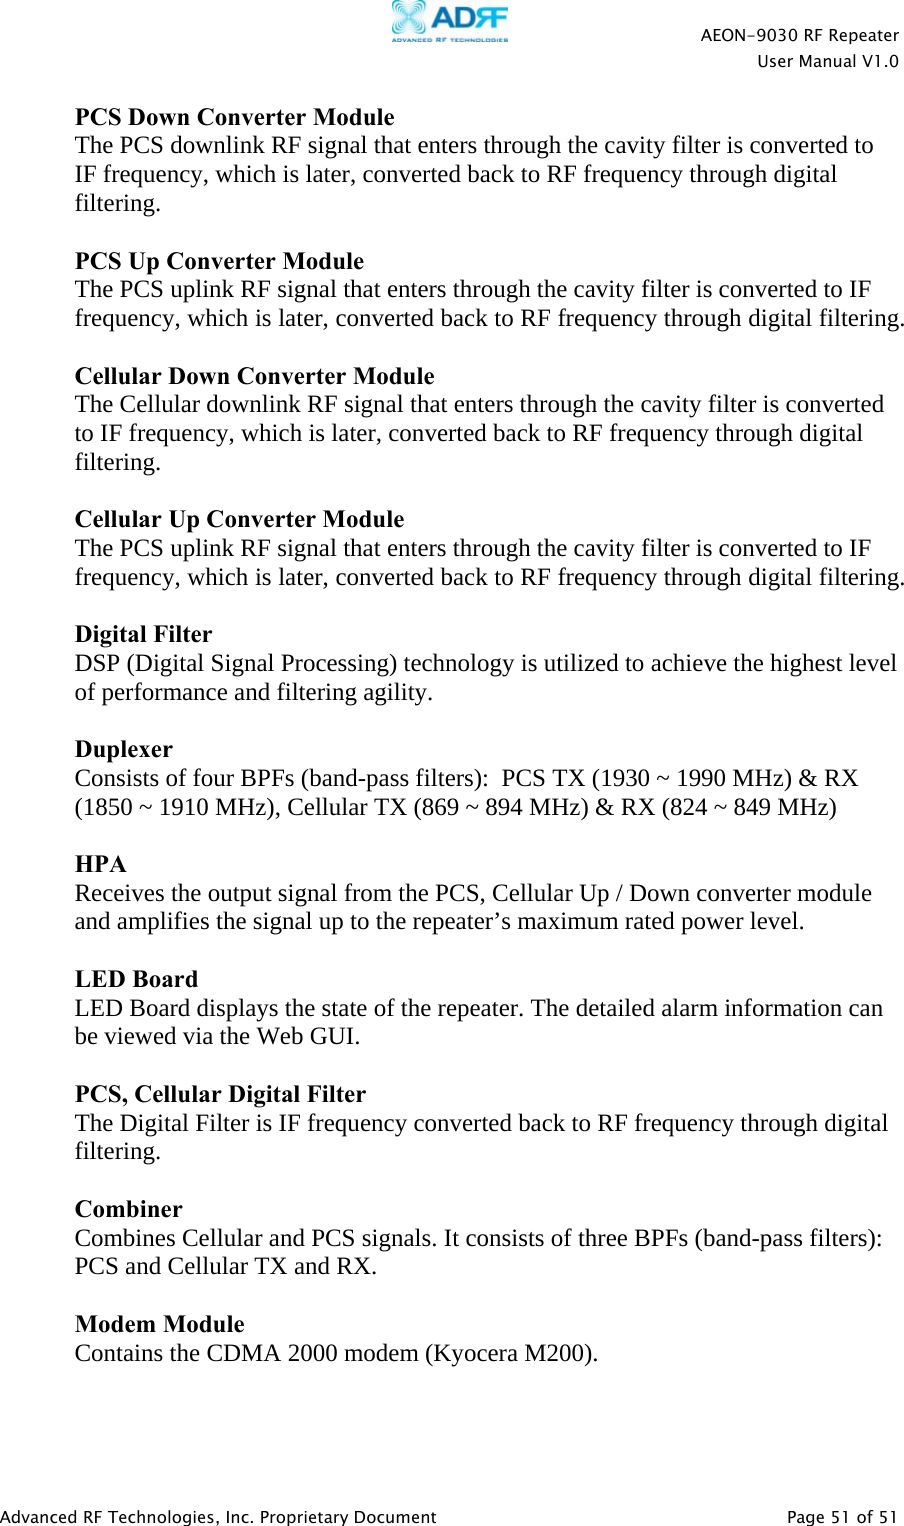    AEON-9030 RF Repeater  User Manual V1.0  Advanced RF Technologies, Inc. Proprietary Document   Page 51 of 51  PCS Down Converter Module The PCS downlink RF signal that enters through the cavity filter is converted to IF frequency, which is later, converted back to RF frequency through digital filtering.  PCS Up Converter Module The PCS uplink RF signal that enters through the cavity filter is converted to IF frequency, which is later, converted back to RF frequency through digital filtering.  Cellular Down Converter Module The Cellular downlink RF signal that enters through the cavity filter is converted to IF frequency, which is later, converted back to RF frequency through digital filtering.  Cellular Up Converter Module The PCS uplink RF signal that enters through the cavity filter is converted to IF frequency, which is later, converted back to RF frequency through digital filtering.  Digital Filter DSP (Digital Signal Processing) technology is utilized to achieve the highest level of performance and filtering agility.  Duplexer Consists of four BPFs (band-pass filters):  PCS TX (1930 ~ 1990 MHz) &amp; RX (1850 ~ 1910 MHz), Cellular TX (869 ~ 894 MHz) &amp; RX (824 ~ 849 MHz)  HPA  Receives the output signal from the PCS, Cellular Up / Down converter module and amplifies the signal up to the repeater’s maximum rated power level.  LED Board  LED Board displays the state of the repeater. The detailed alarm information can be viewed via the Web GUI.  PCS, Cellular Digital Filter The Digital Filter is IF frequency converted back to RF frequency through digital filtering.  Combiner Combines Cellular and PCS signals. It consists of three BPFs (band-pass filters):  PCS and Cellular TX and RX.  Modem Module Contains the CDMA 2000 modem (Kyocera M200).  